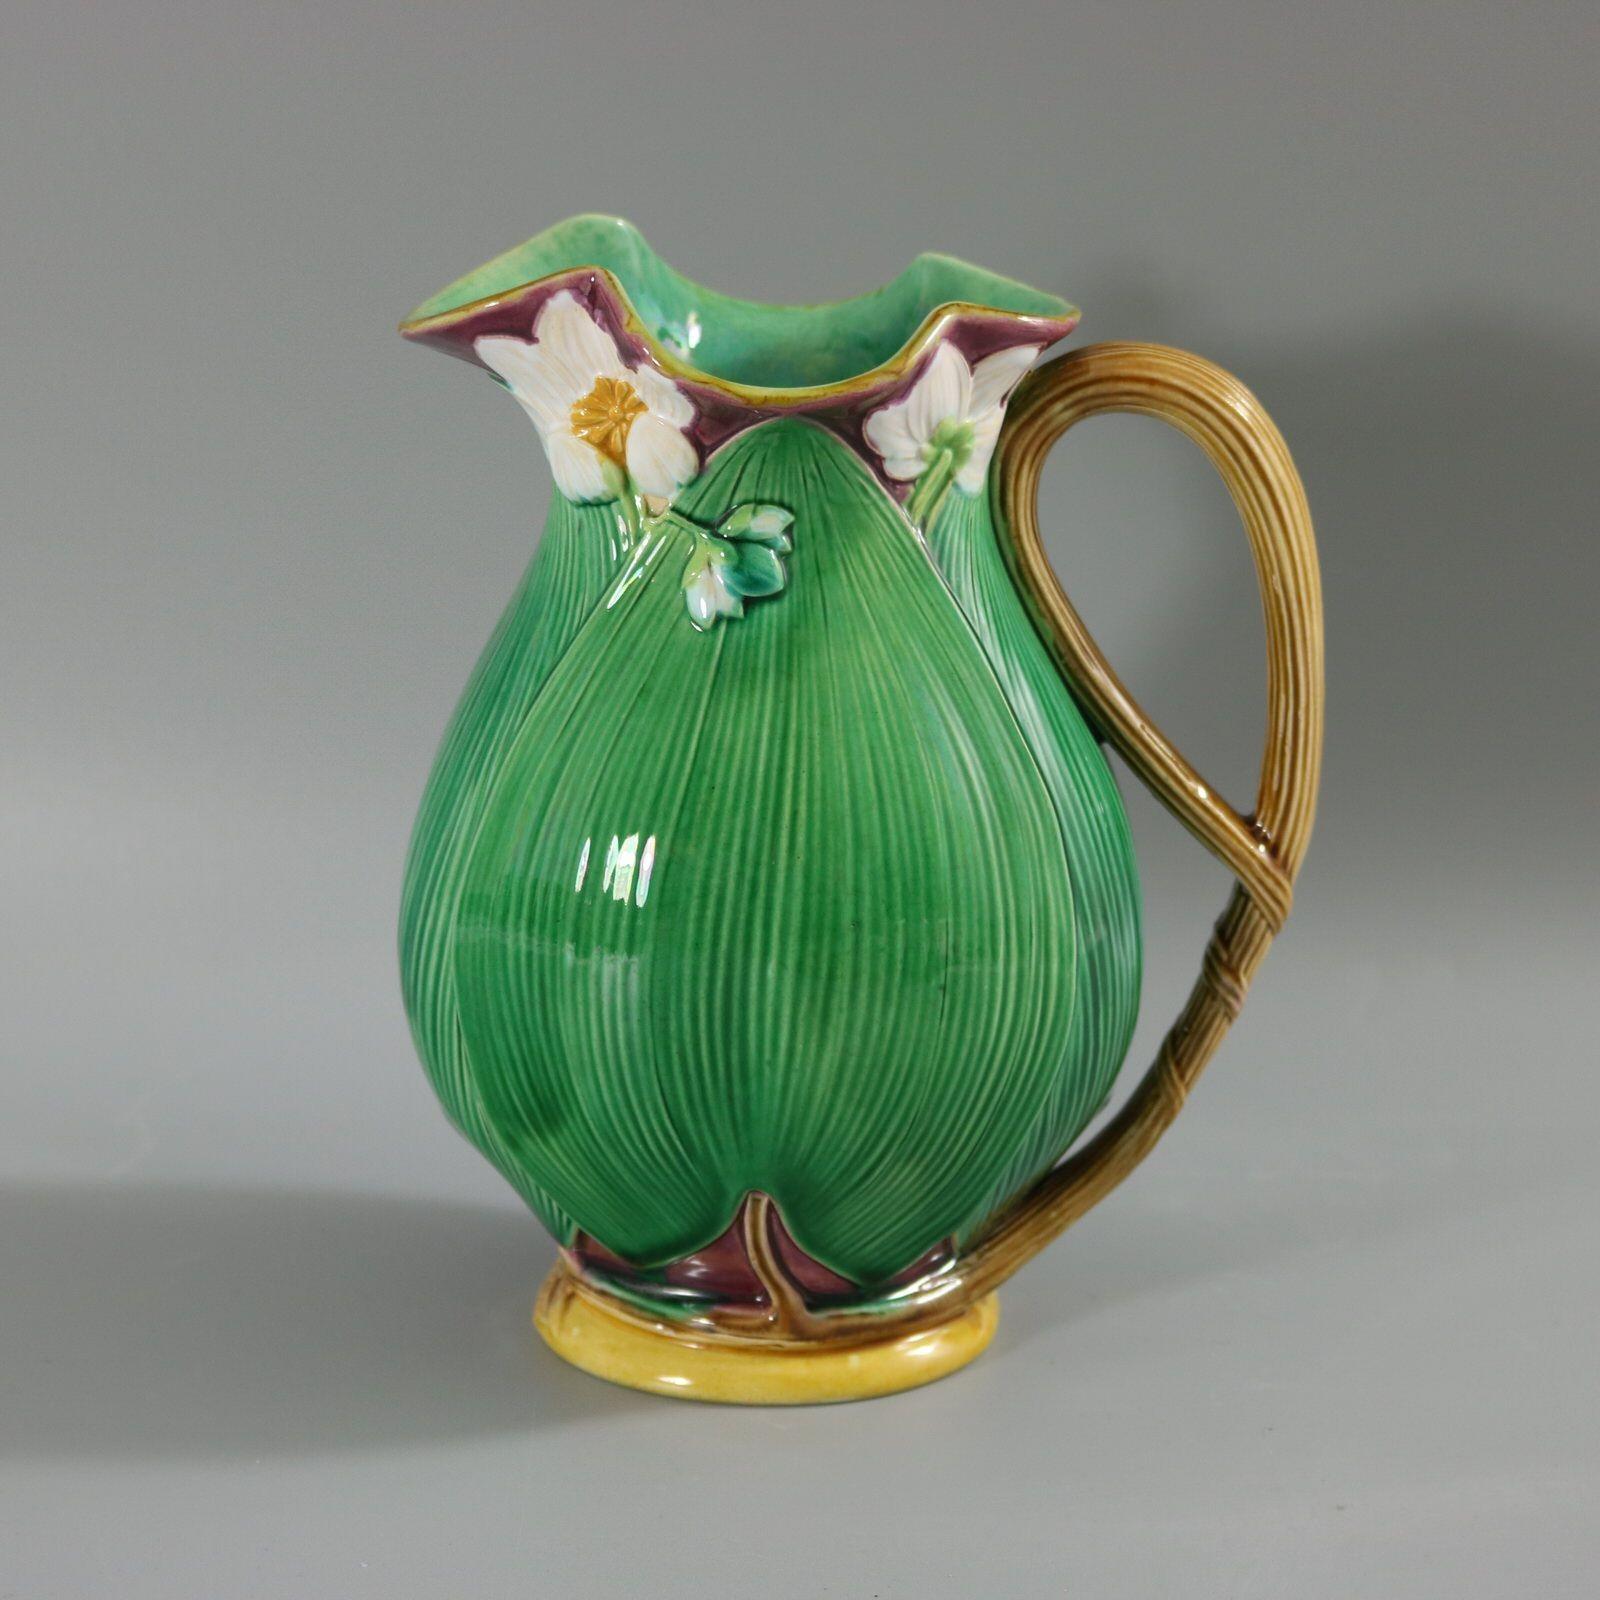 Minton Majolica jug/pitcher which features flowering lilies and lily pads. Colouration: green, white, dark pink, are predominant. The piece bears maker's marks for the Minton pottery. Bears a pattern number, '1228 18'. Marks include a factory